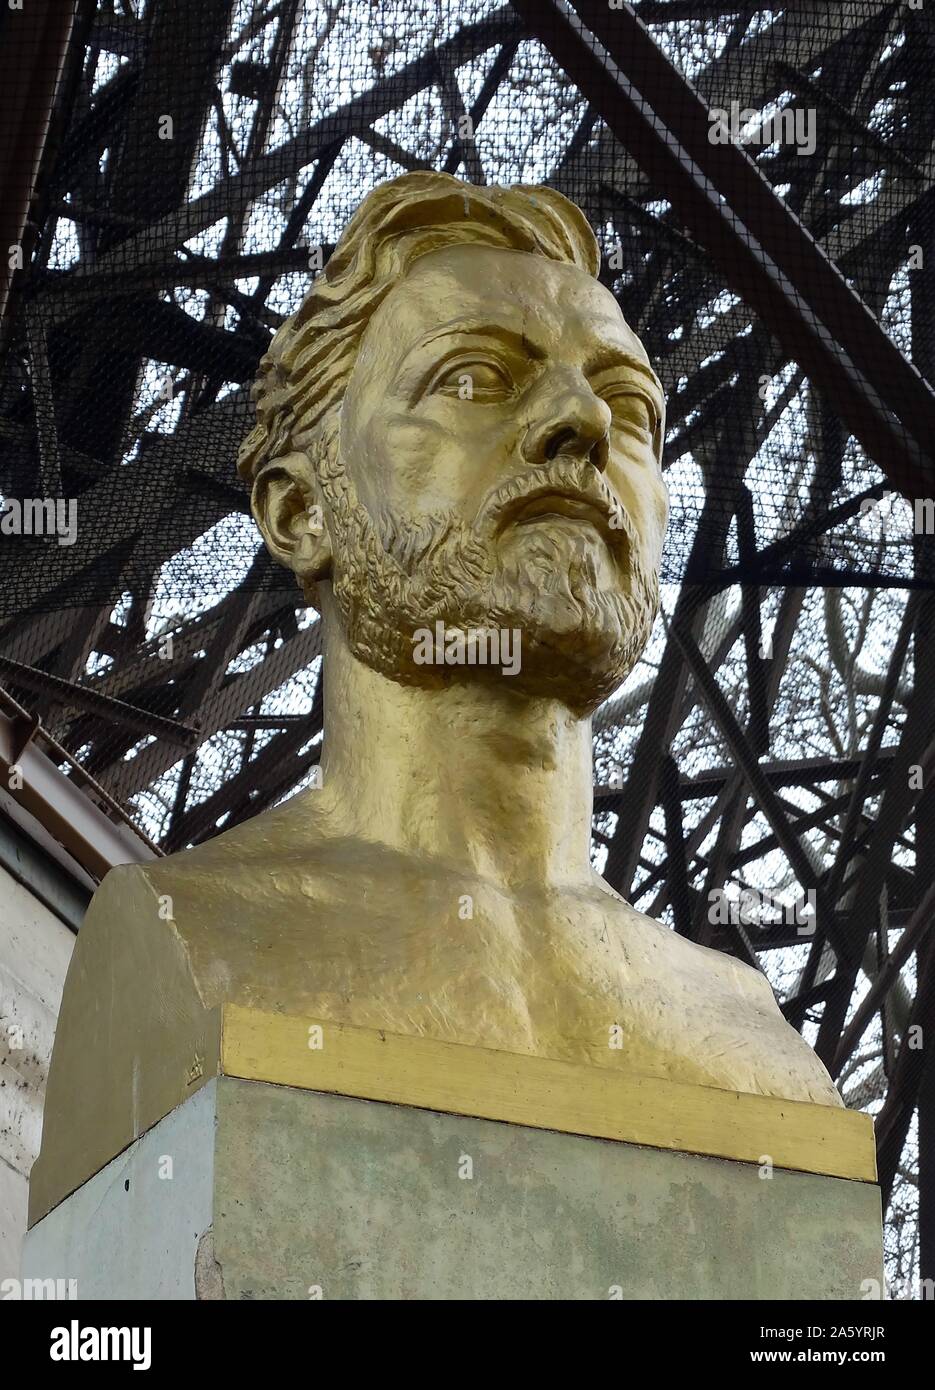 Gilded bust depicting Alexandre Gustave Eiffel (1832 ñ 1923) French civil engineer and architect of the Eiffel Tower, Paris. Stock Photo